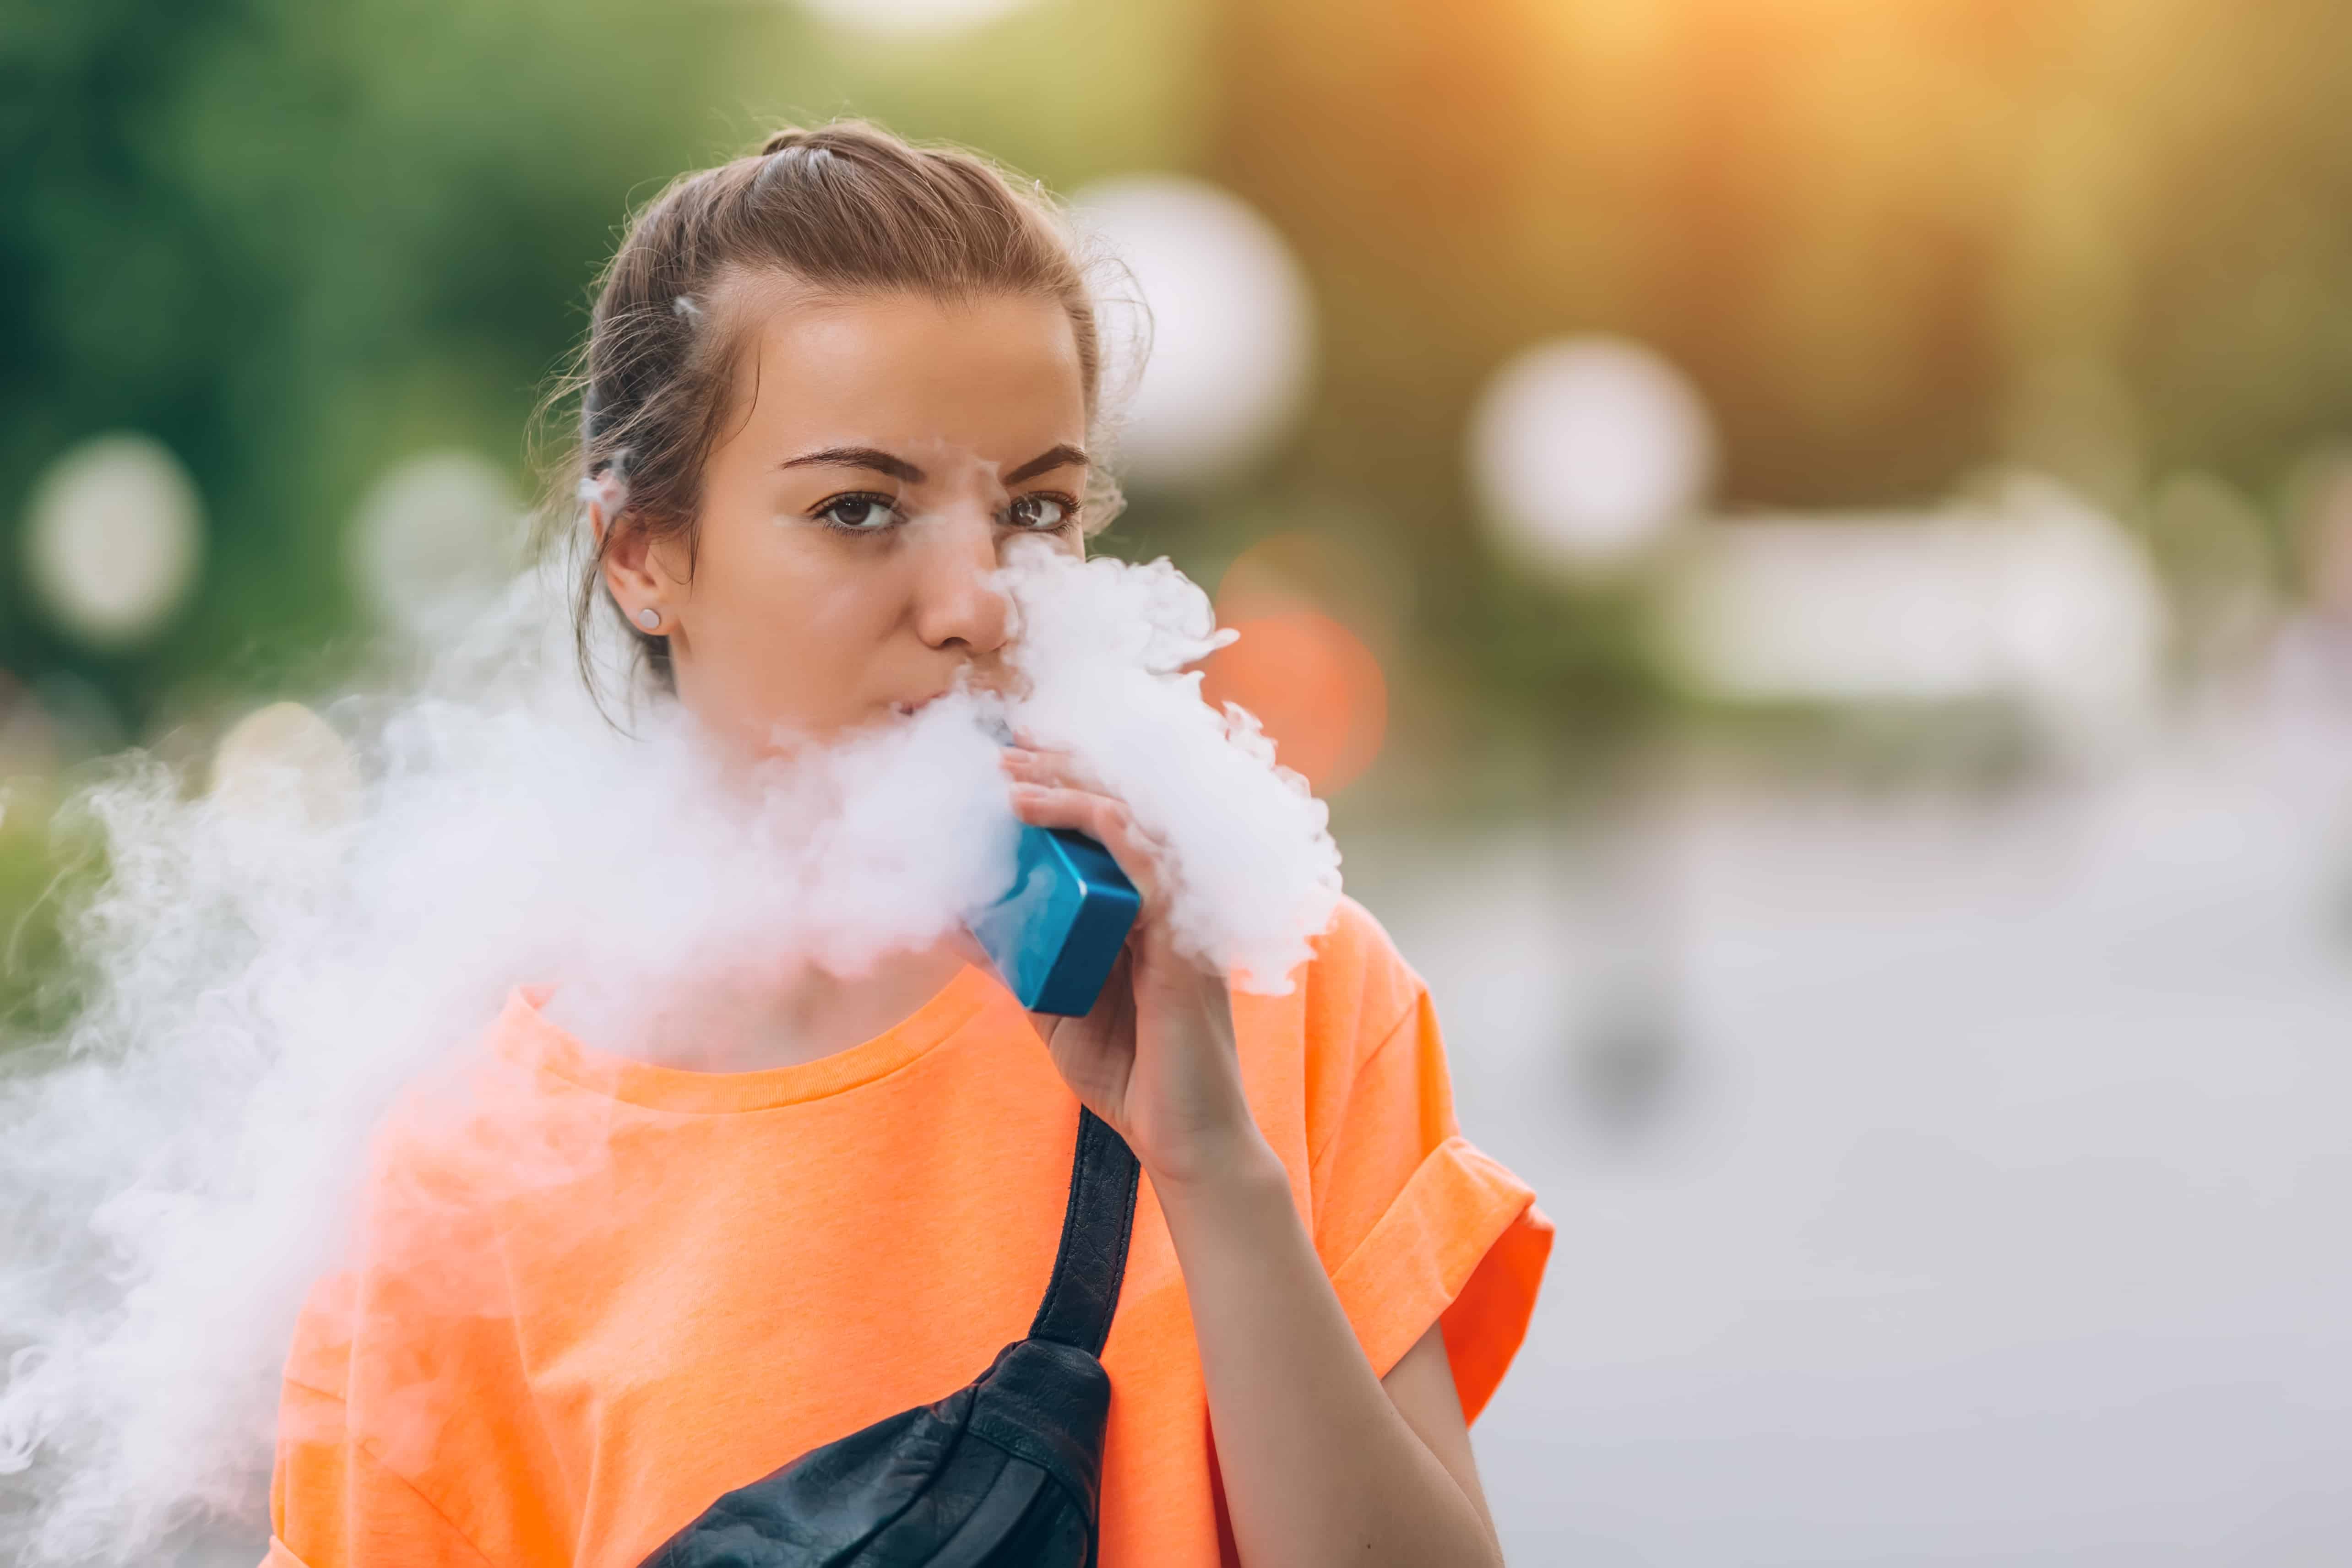 vaping-changes-oral-microbiome-increasing-risk-for-infection-odha